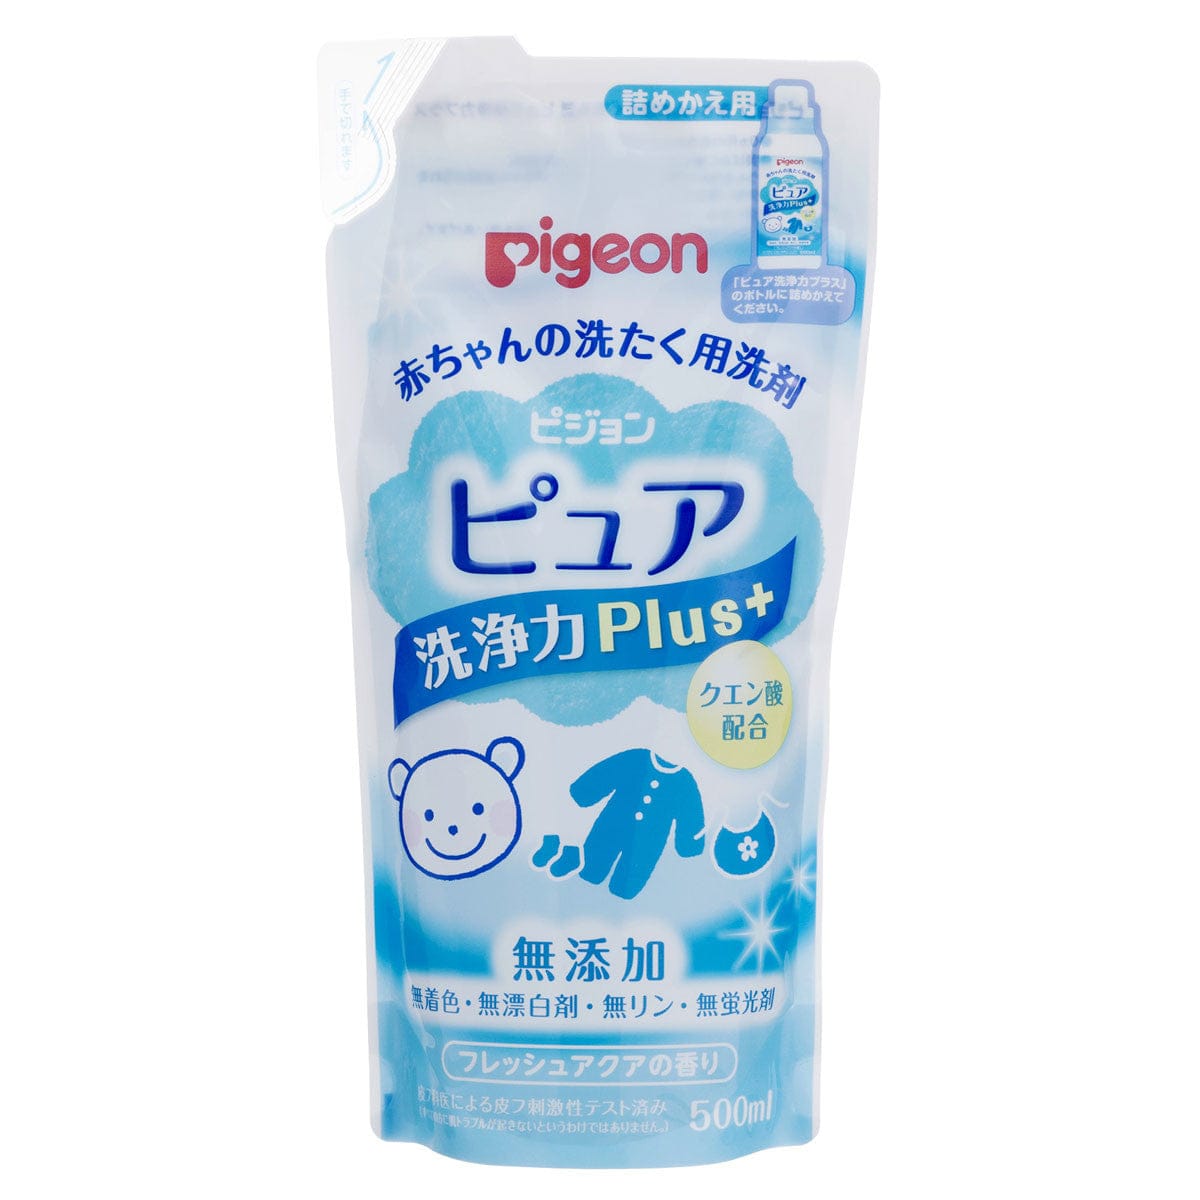 Pigeon - Baby Laundry Detergent Pure Cleaning Power Plus - 500ml Baby Detergents 4902508121354 Durio.sg